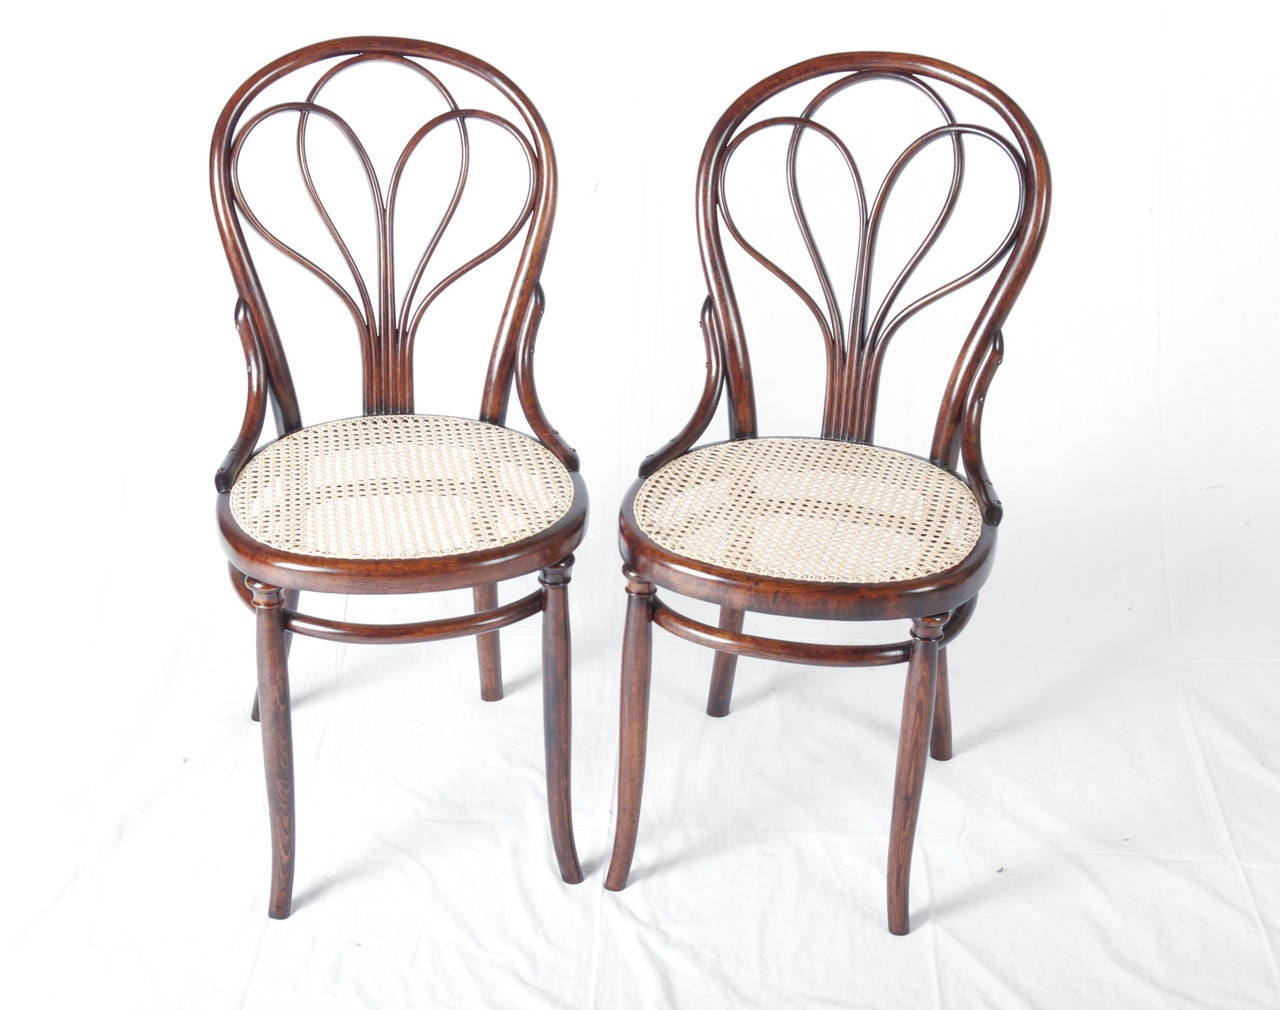 Pair of Thonet no. 25 chairs with original bentwood frame in walnut stained beech with new cane seat. 
Not signed, fully restored with shellac finish.